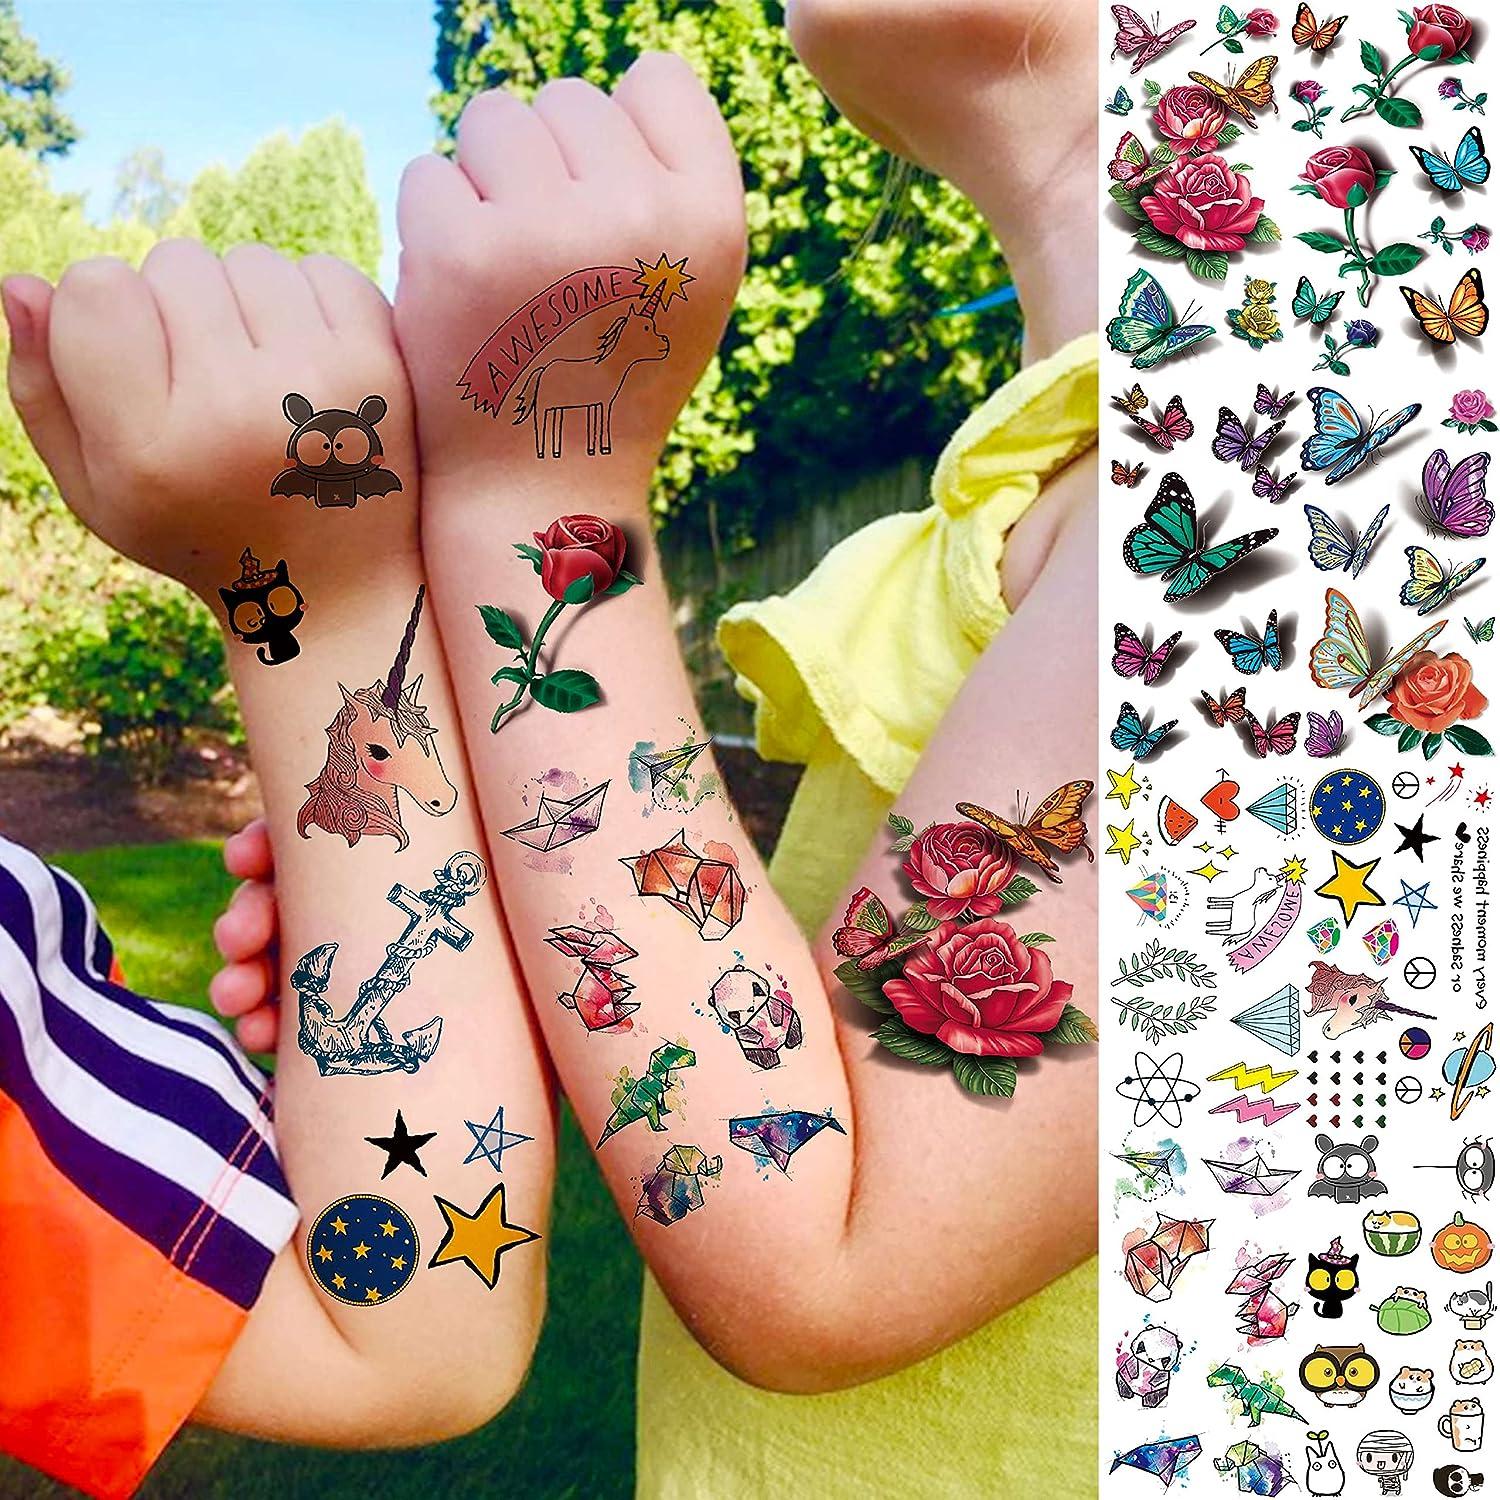 20 Sheets Black Tiny Temporary Tattoo, Hands Face Tattoo Sticker for Men  Women, Flower Space Moon Snake Designs Body Art on Arm Neck Shoulder  Clavicle Waterproof : Amazon.in: Beauty